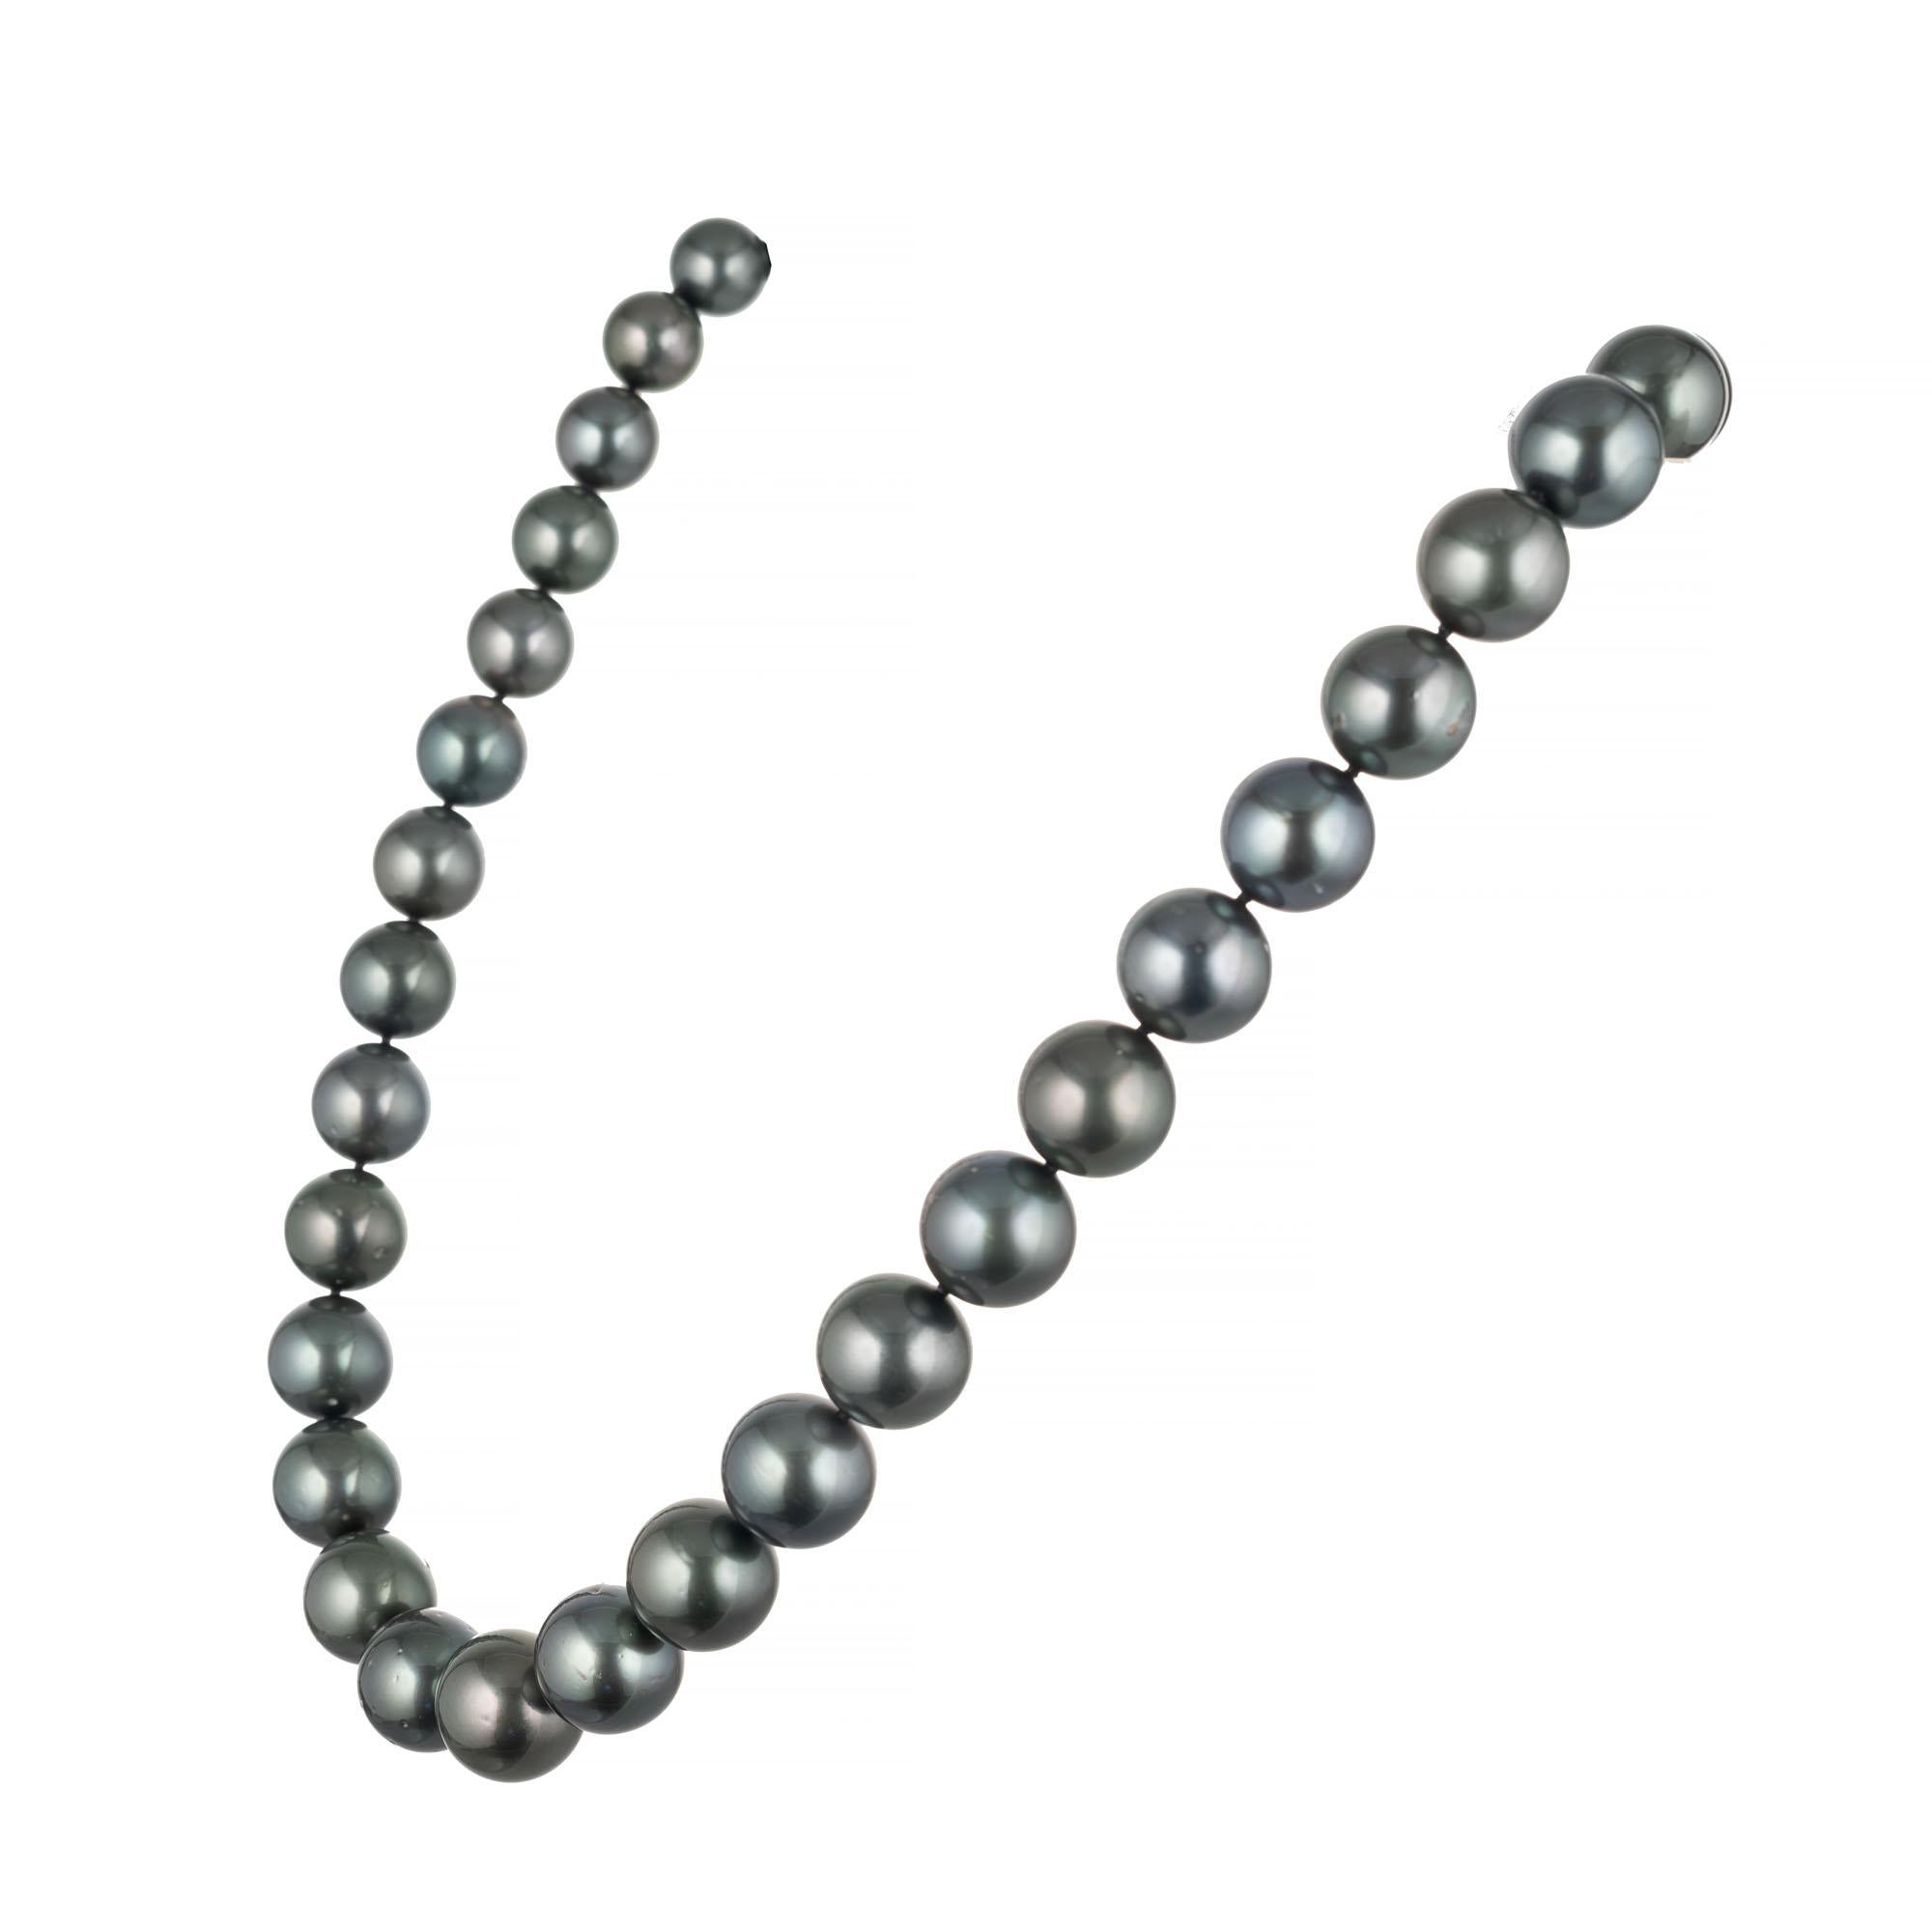 18 Inch strand of 37 south sea black cultured pearls graduating in size from 10mm to 13.25mm attached by a corrugated 10mm 14k white gold ball lock. High lustre few blemishes. 18 inches in length. Well matched pearls. Truly a spectacular necklace